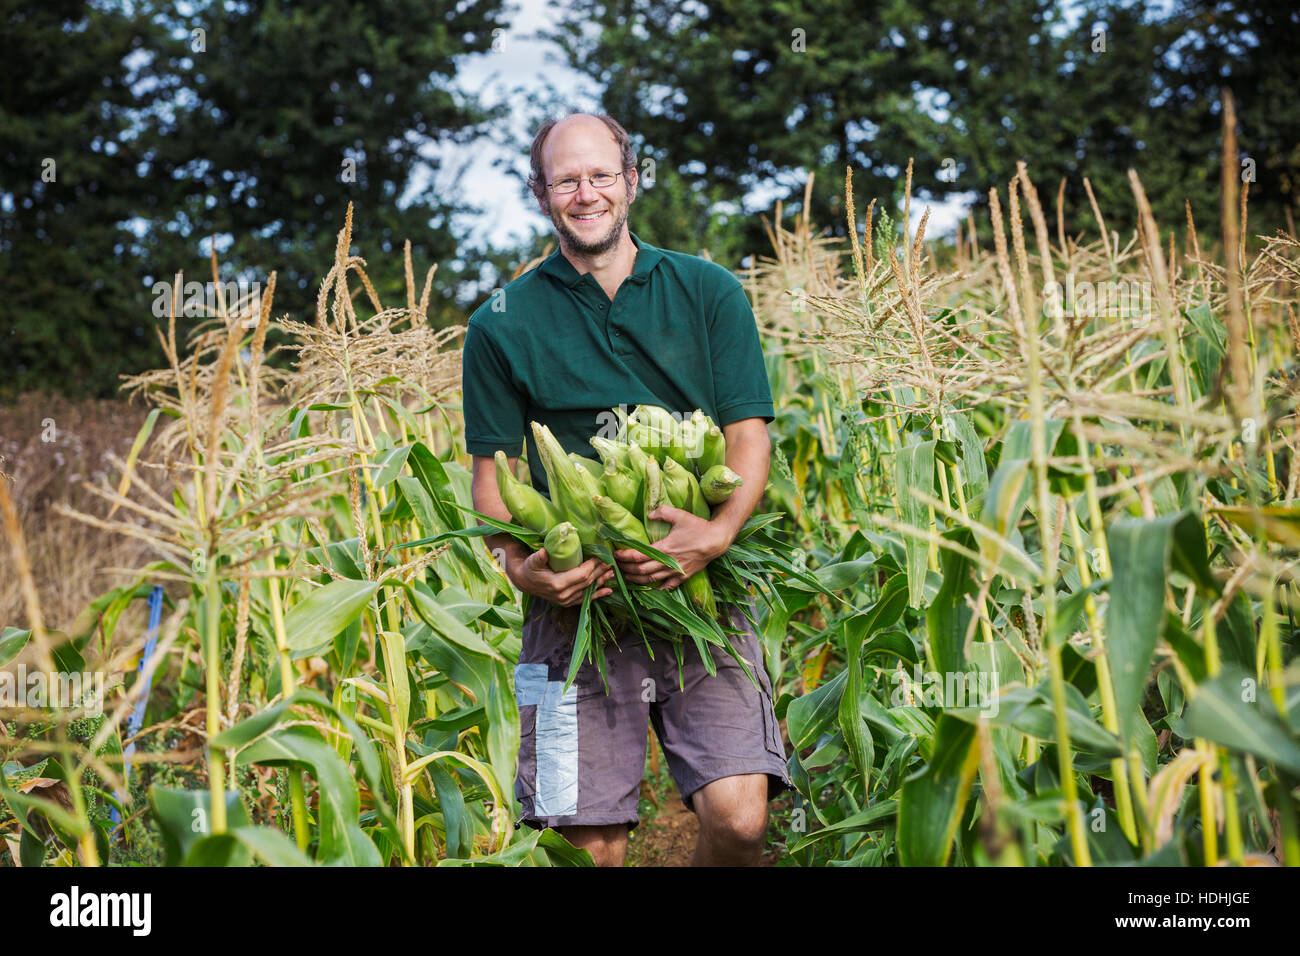 A man harvesting ripe sweet corn cobs, with arms full of cobs. Stock Photo